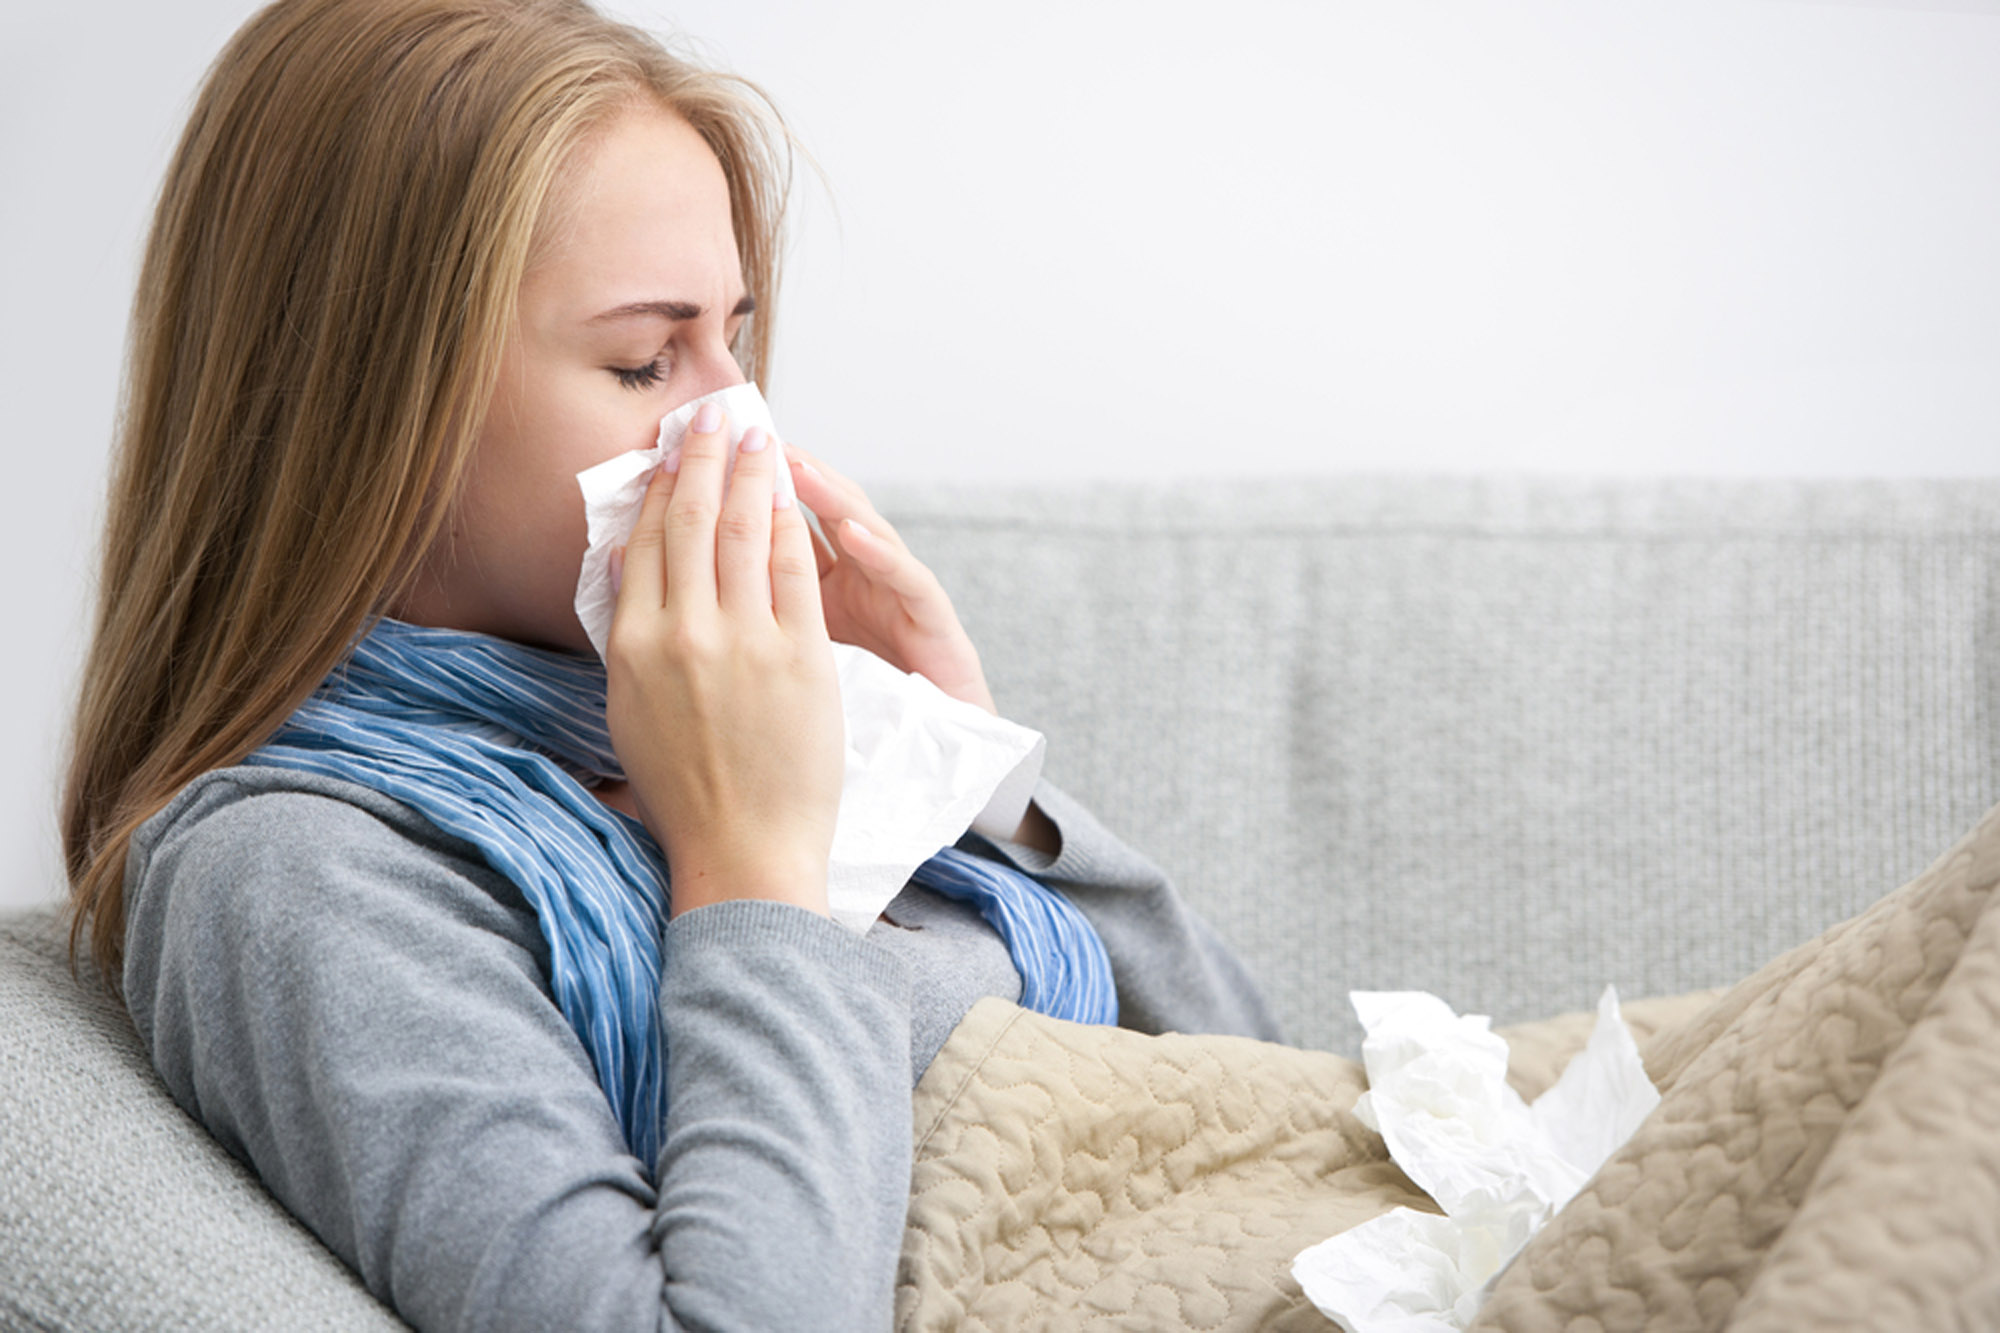 Adults only catch flu around twice a decade, study finds